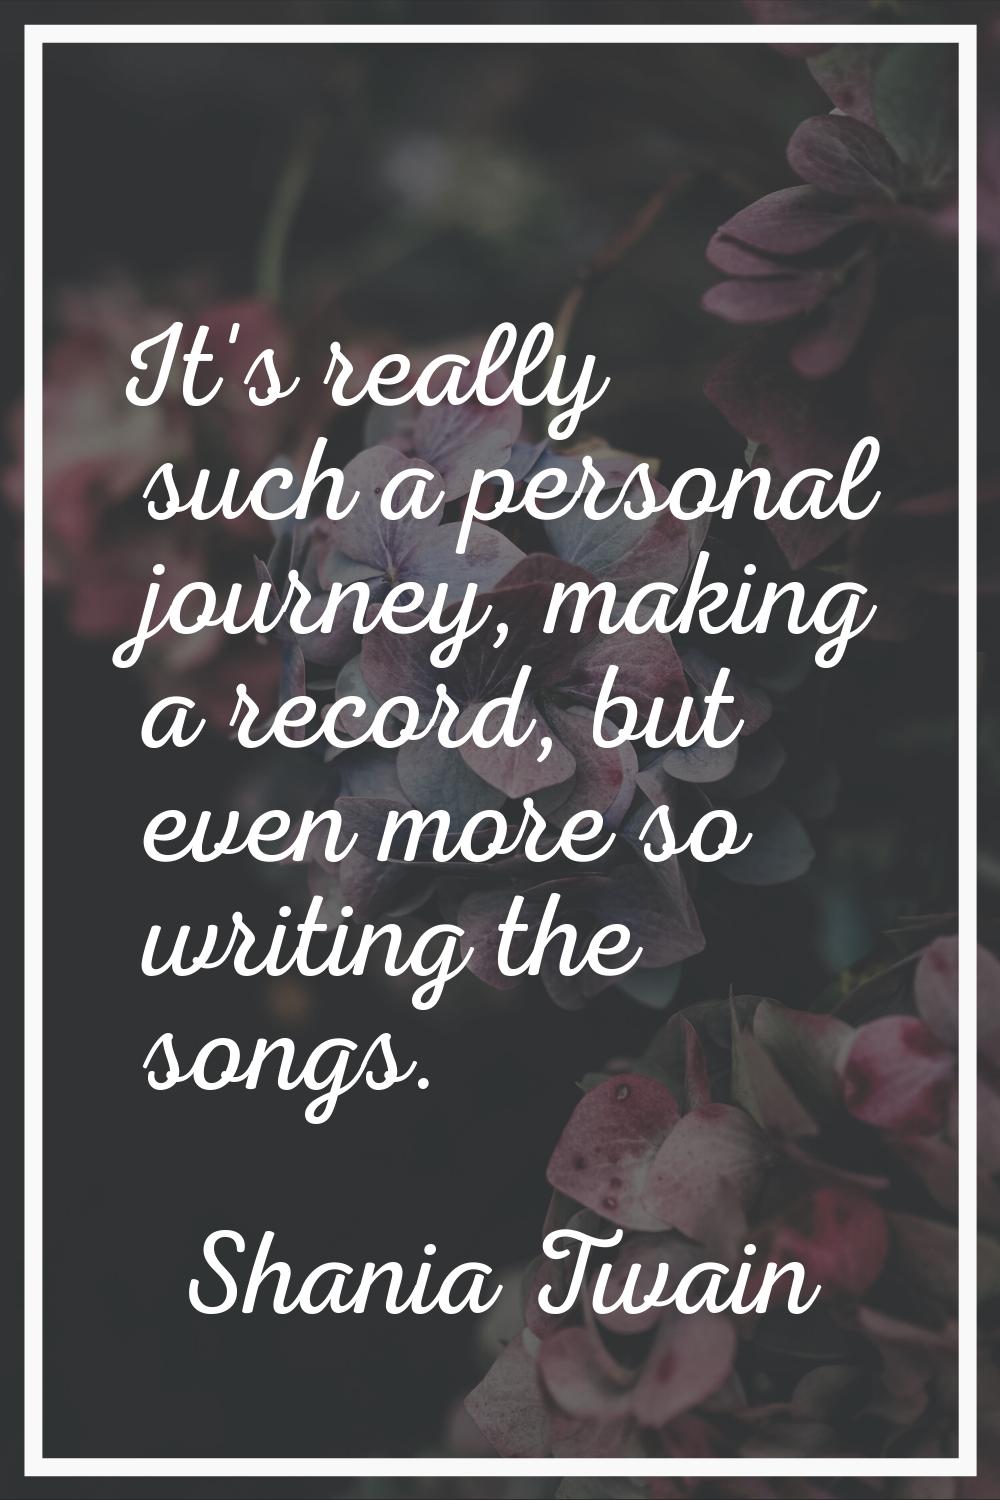 It's really such a personal journey, making a record, but even more so writing the songs.